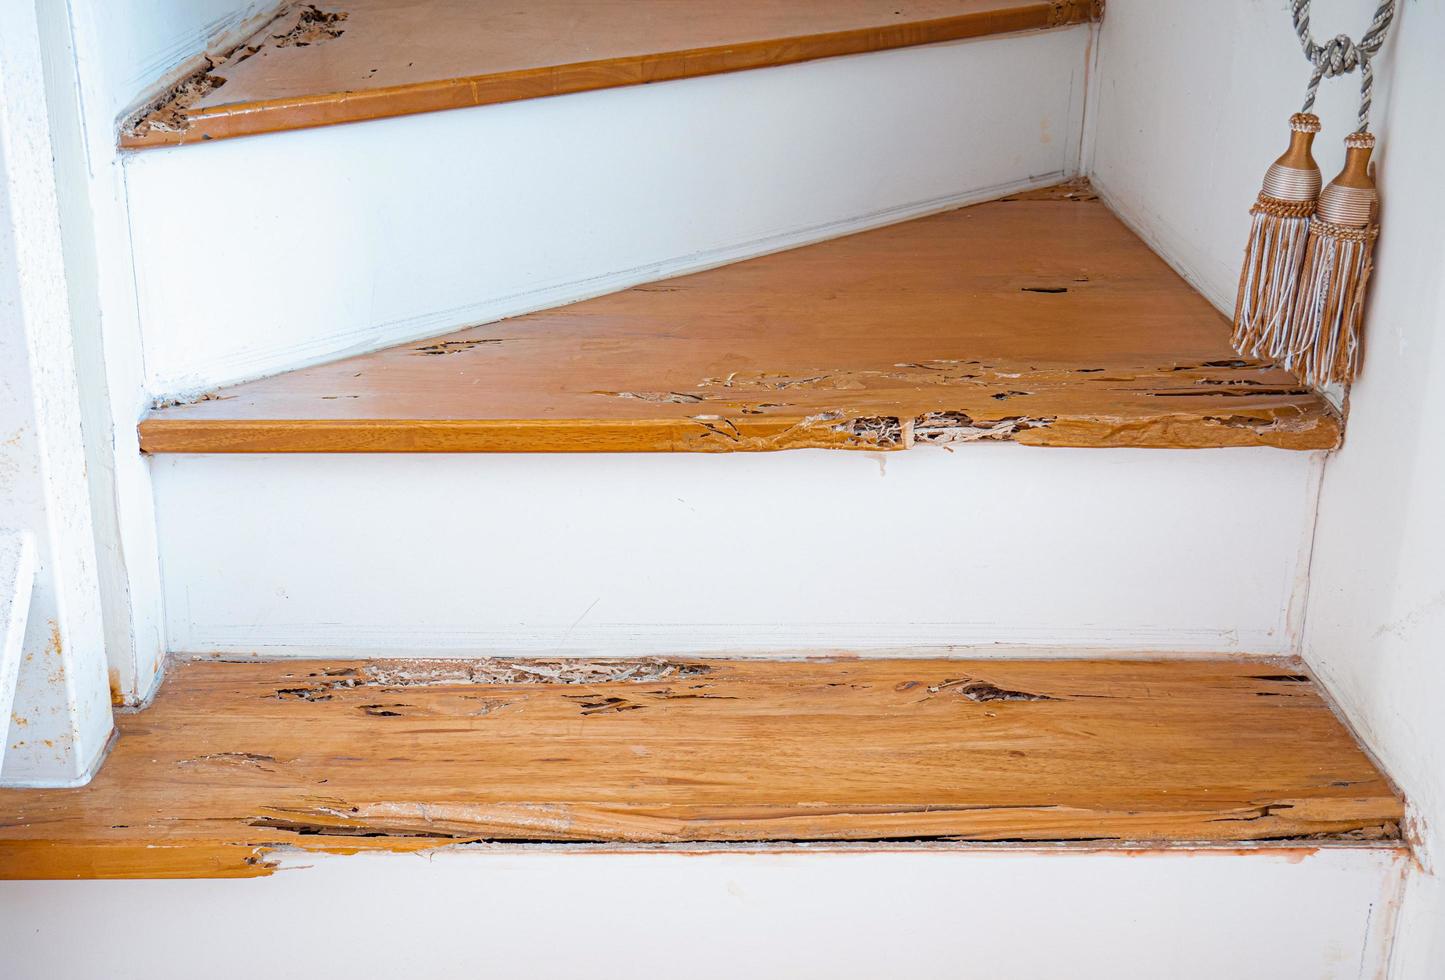 House stairs that were bitten by termites. The wood was broken because it was destroyed by termites. photo